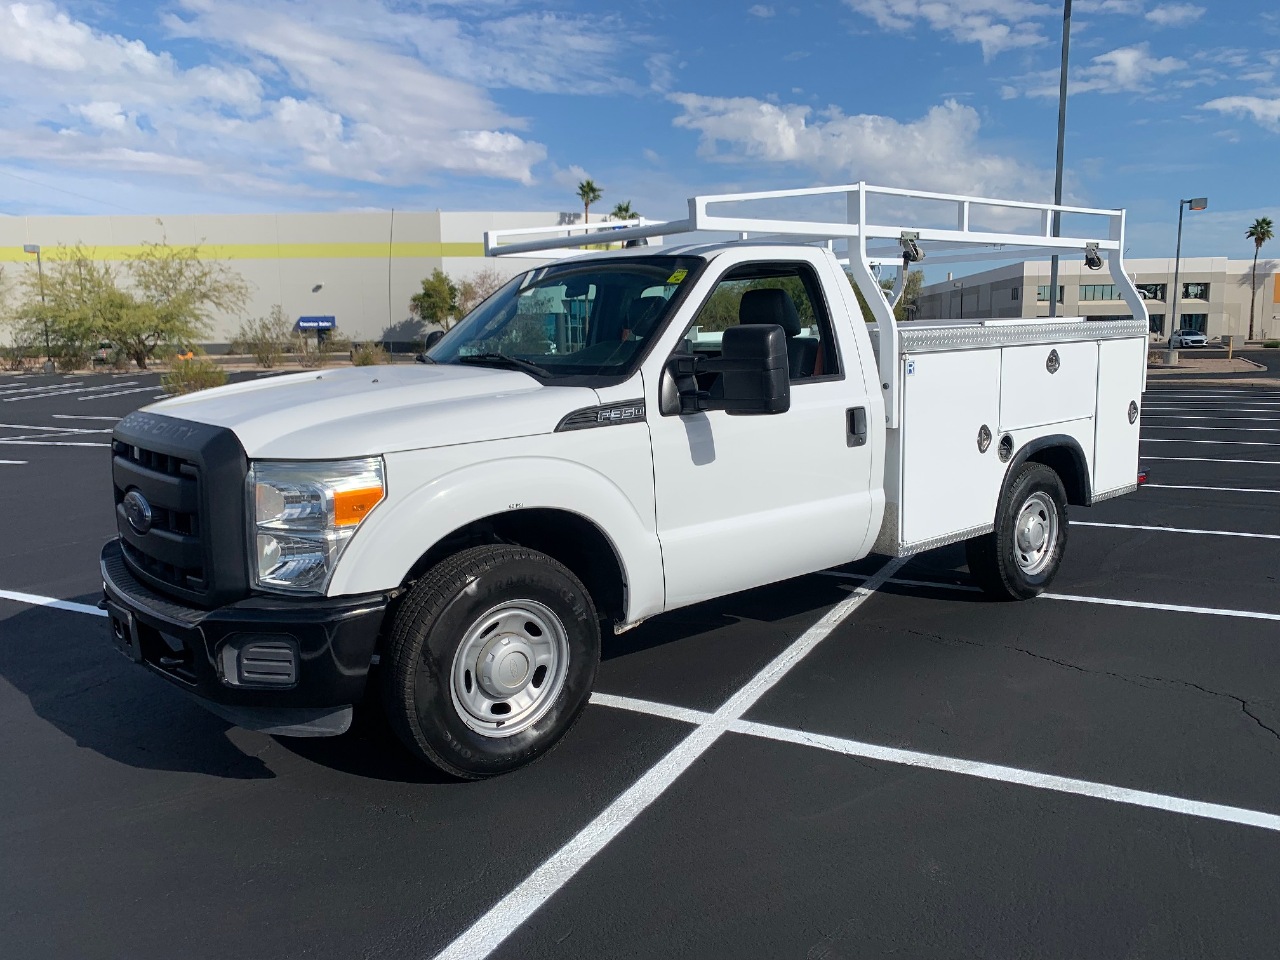 USED 2013 FORD F350 SRW SERVICE - UTILITY TRUCK #3230